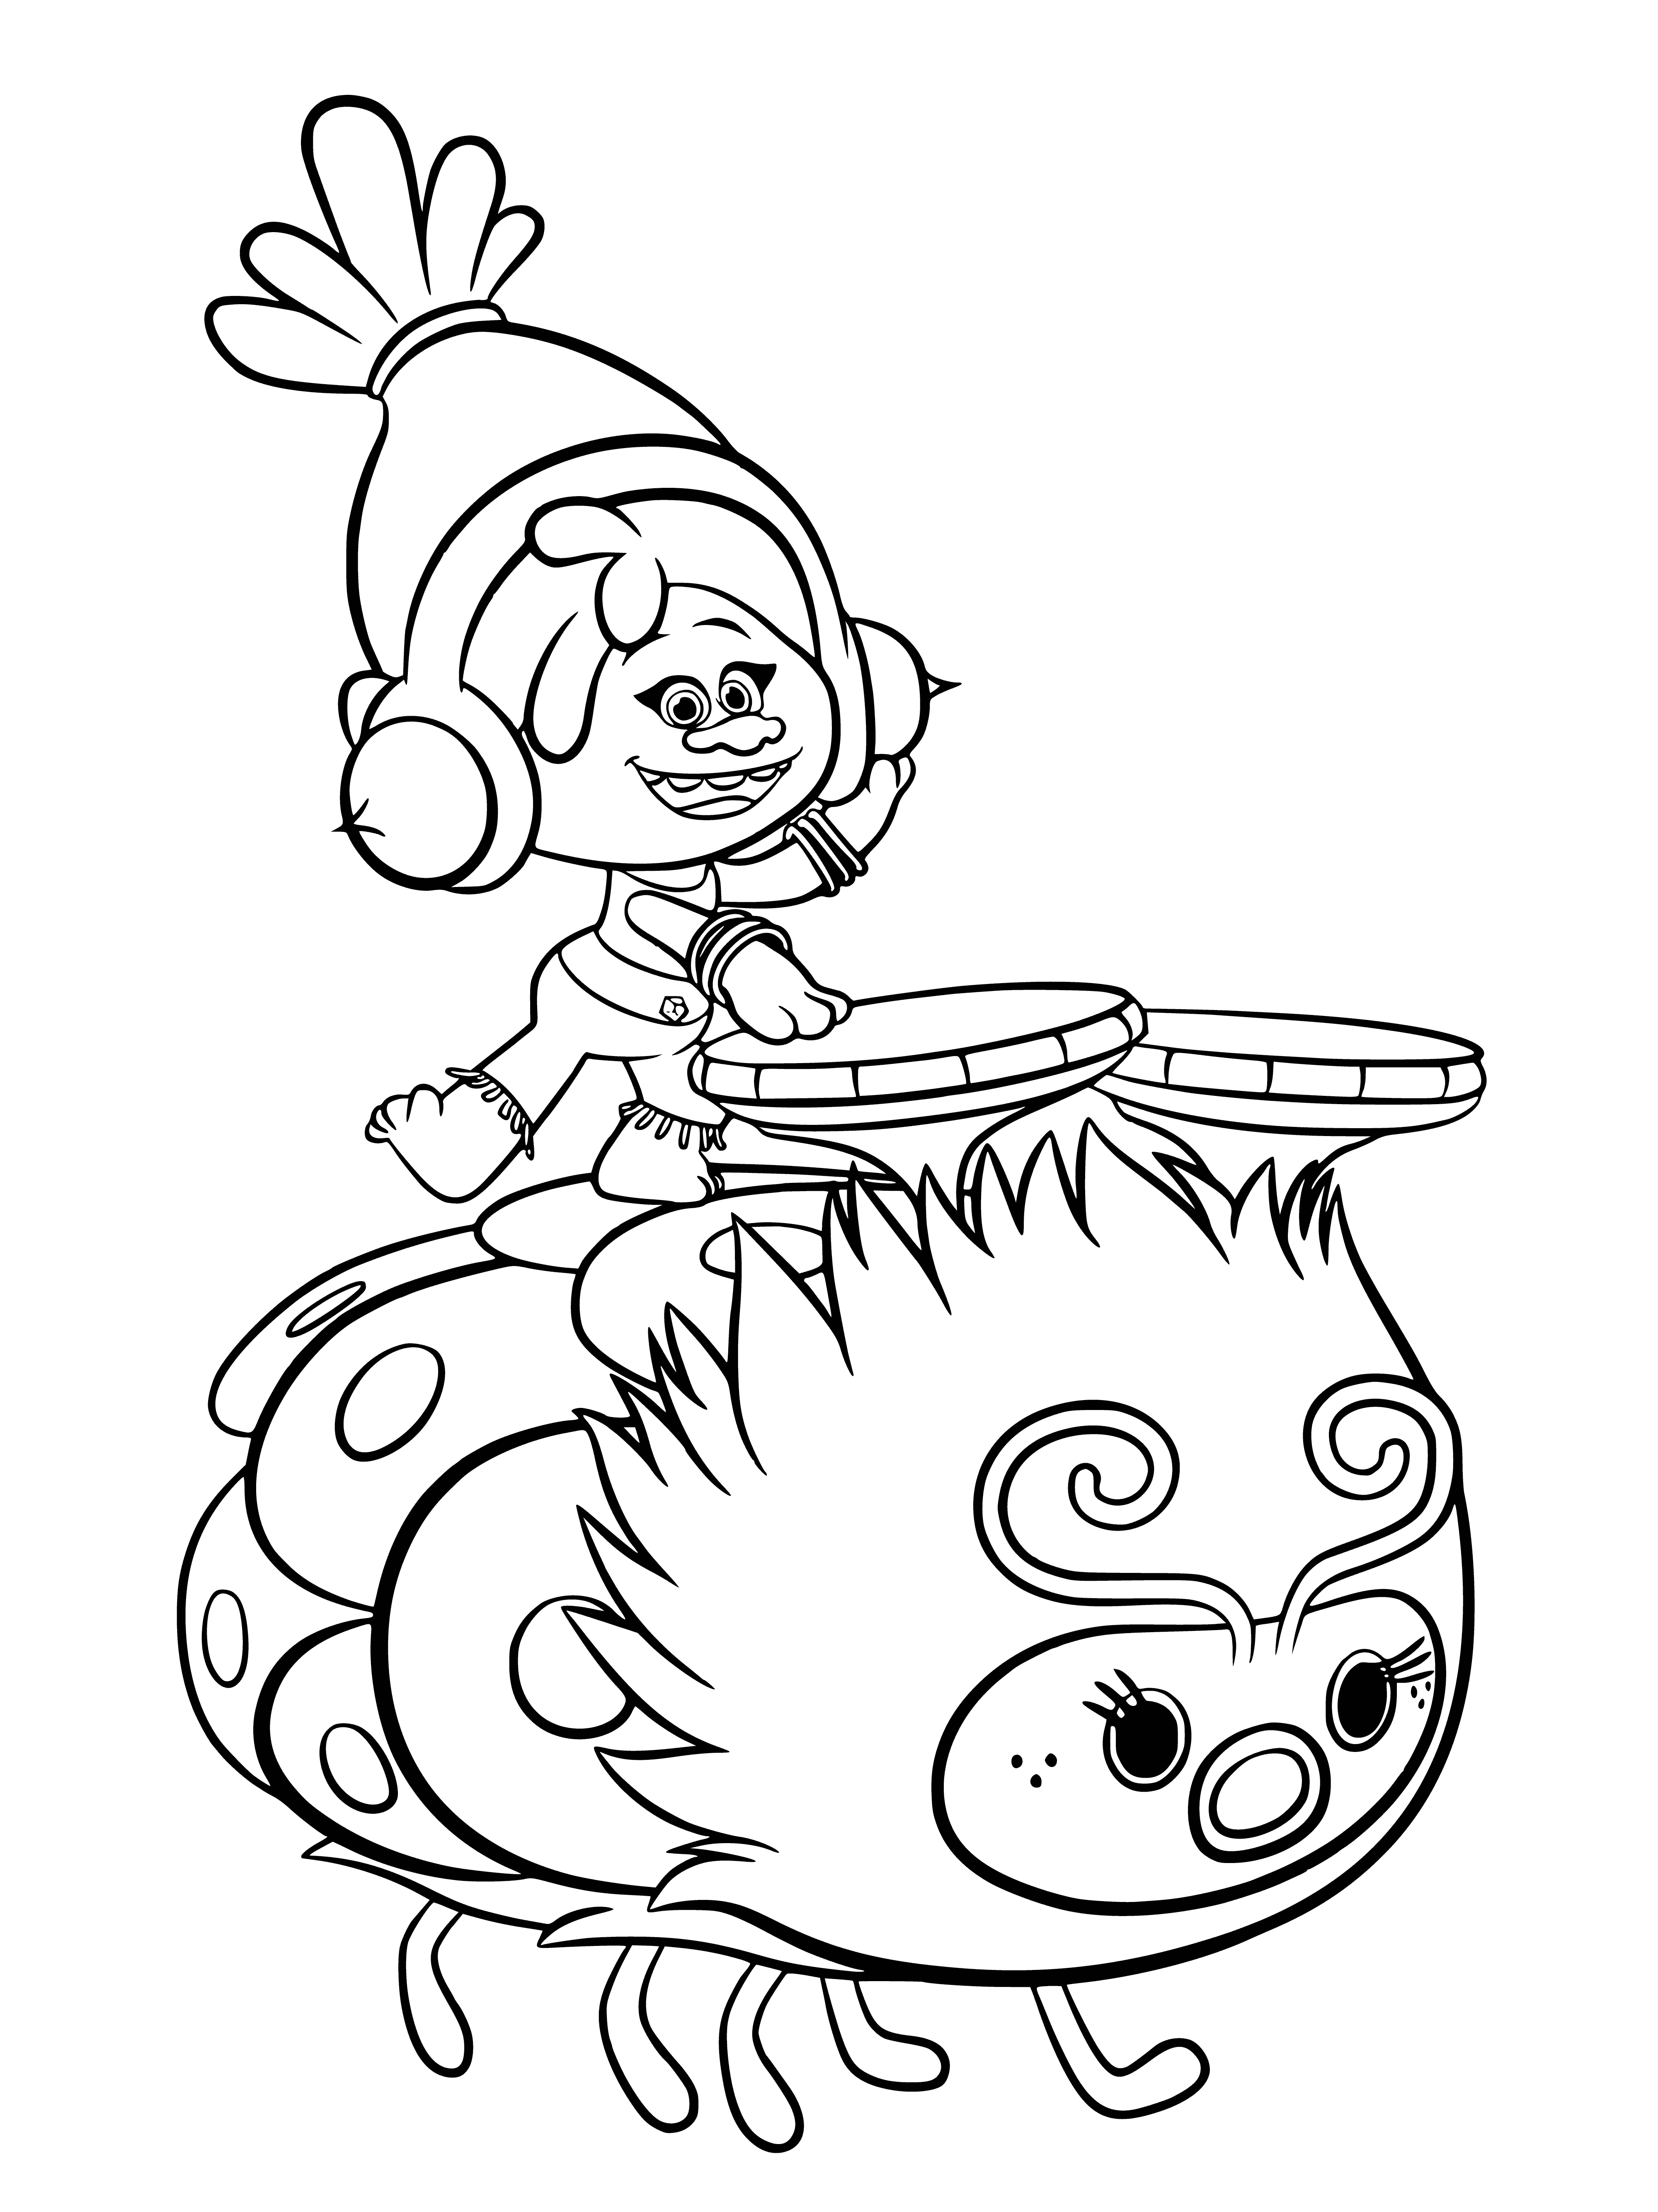 coloring page: Troll figurine toy with headphones plays 3 DJ sound effects when a button is pressed.